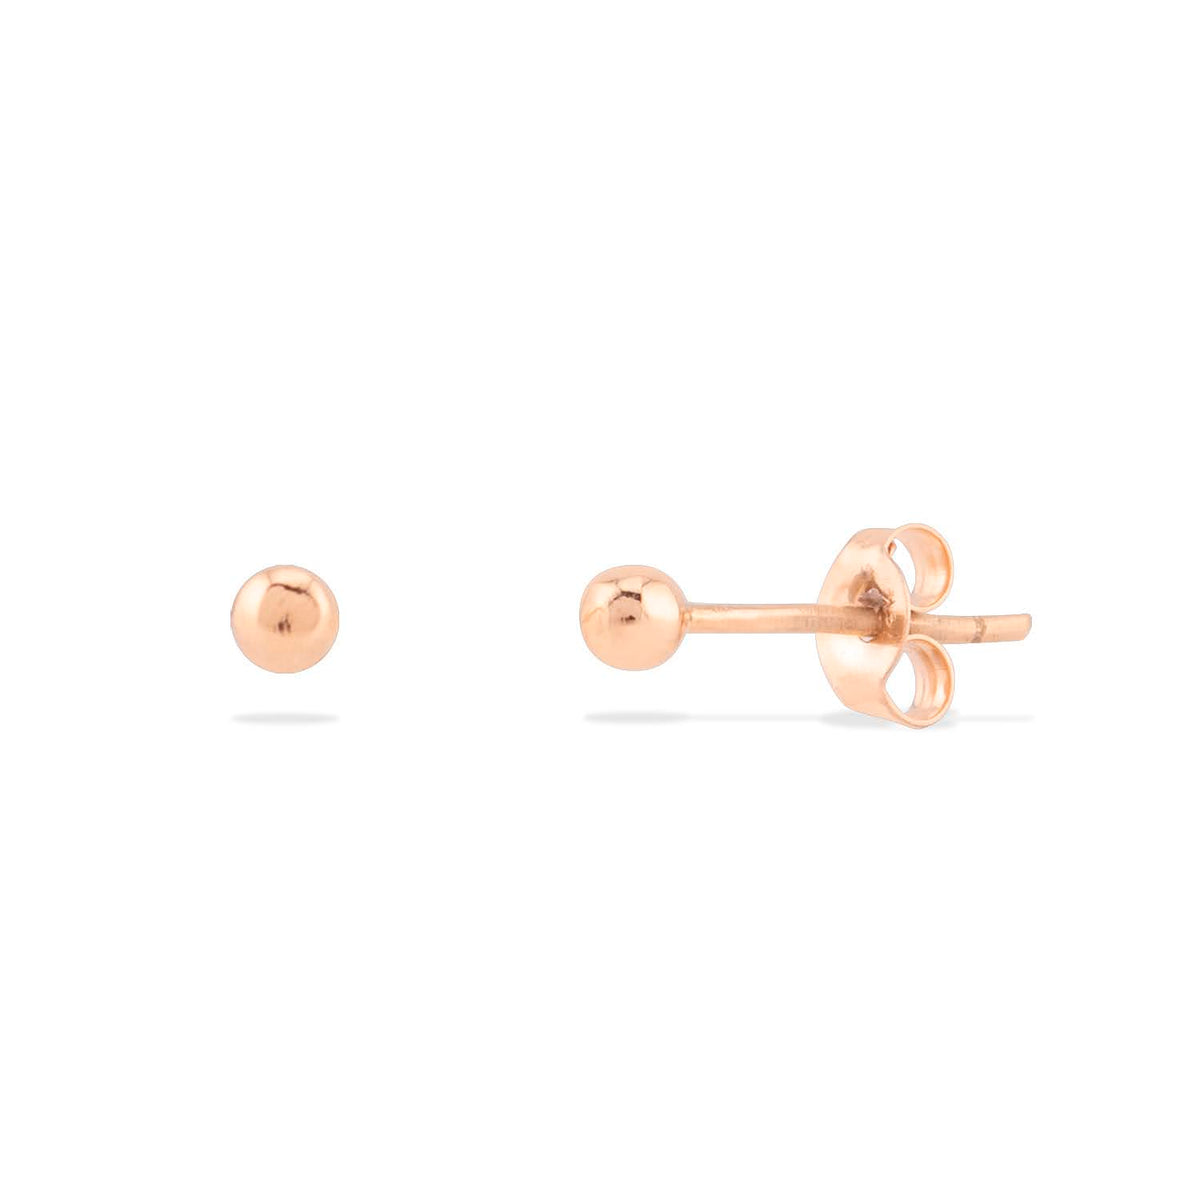 Ball earrings with 14k yellow gold chain and rod